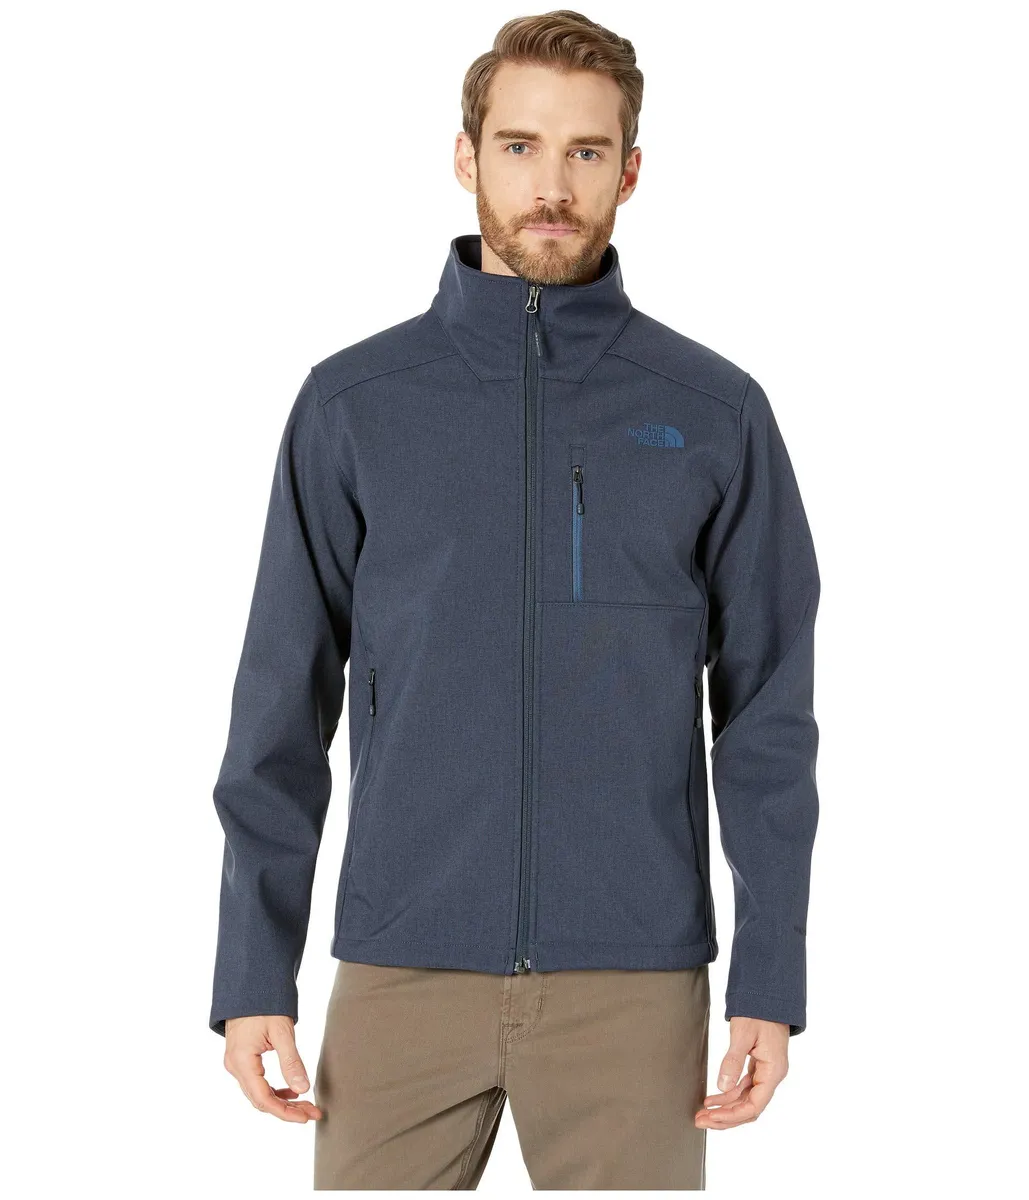 The North Face Apex Bionic 2 Jacket for Men - KayaksBoats